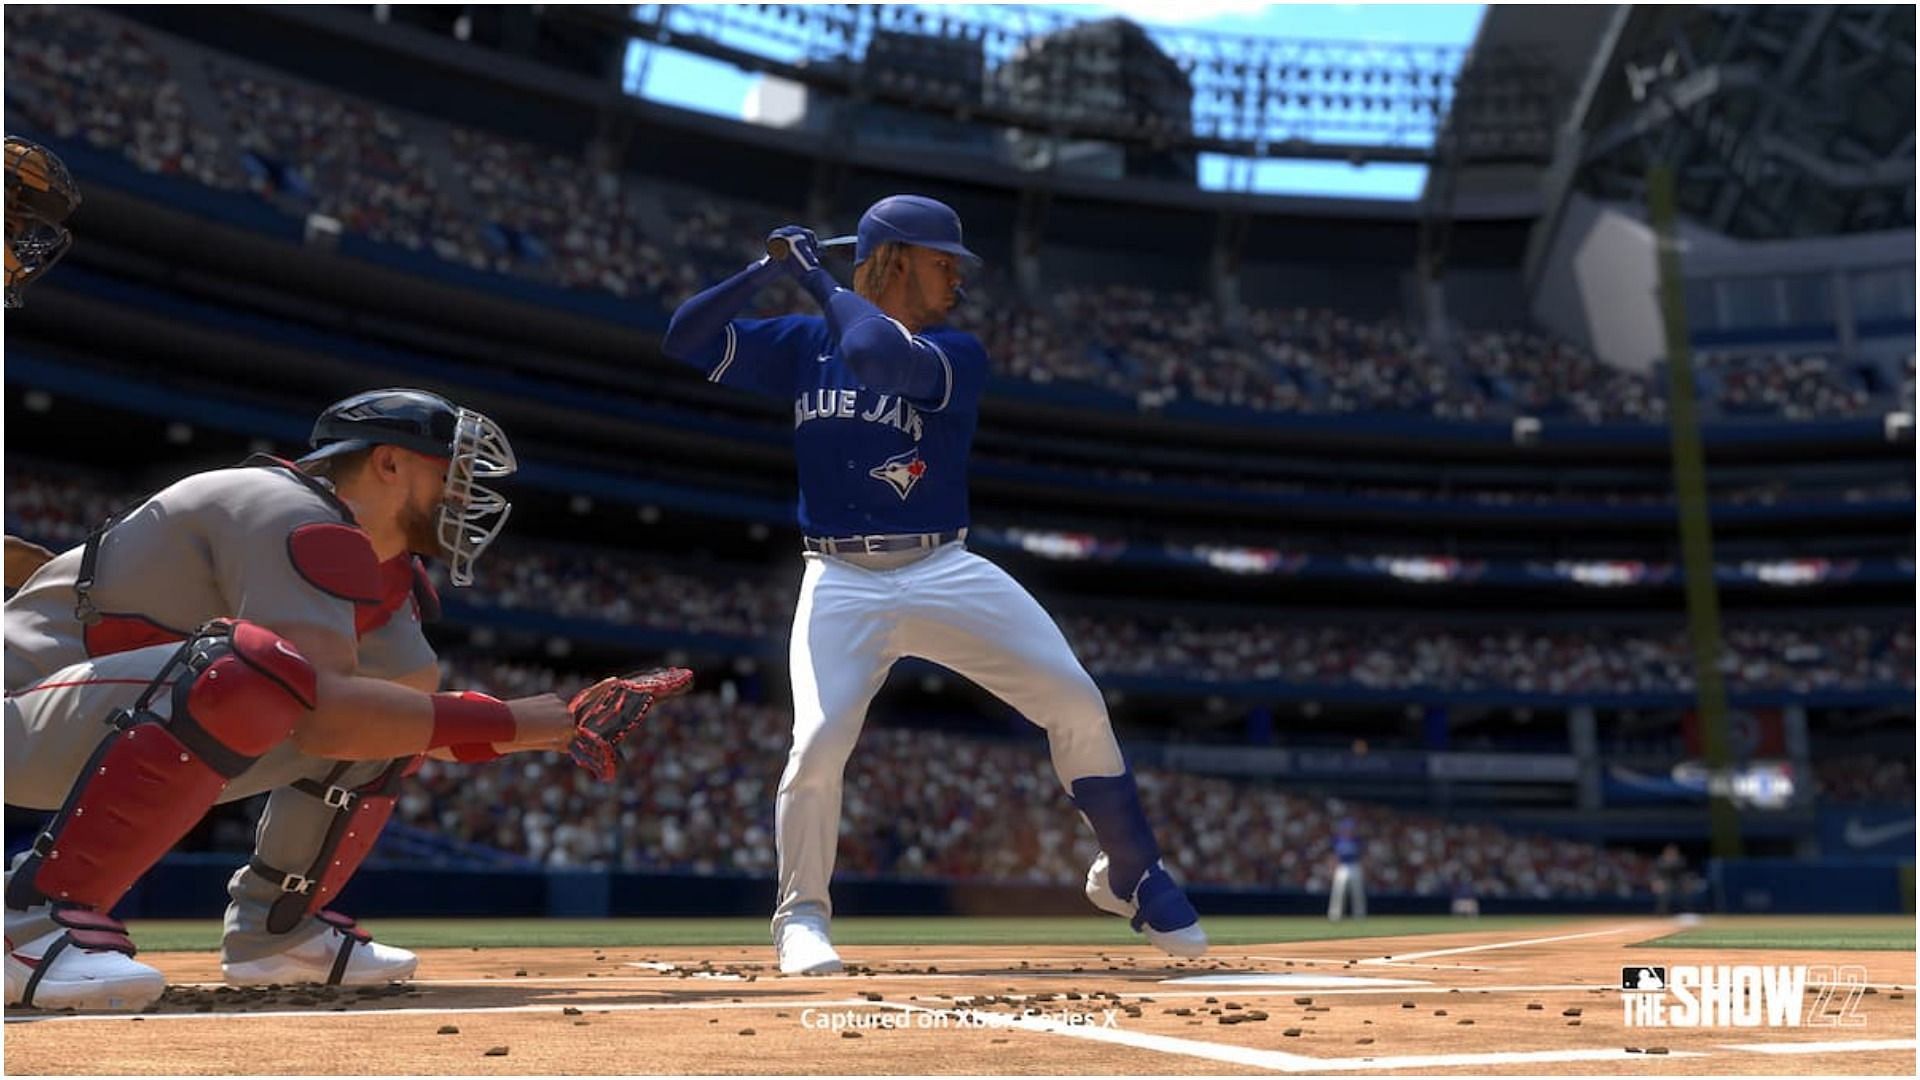 Solving network errors is must for MLB The Show 22 if players want to play the Diamond Dynasty mode (Image via MLB The Show 22)